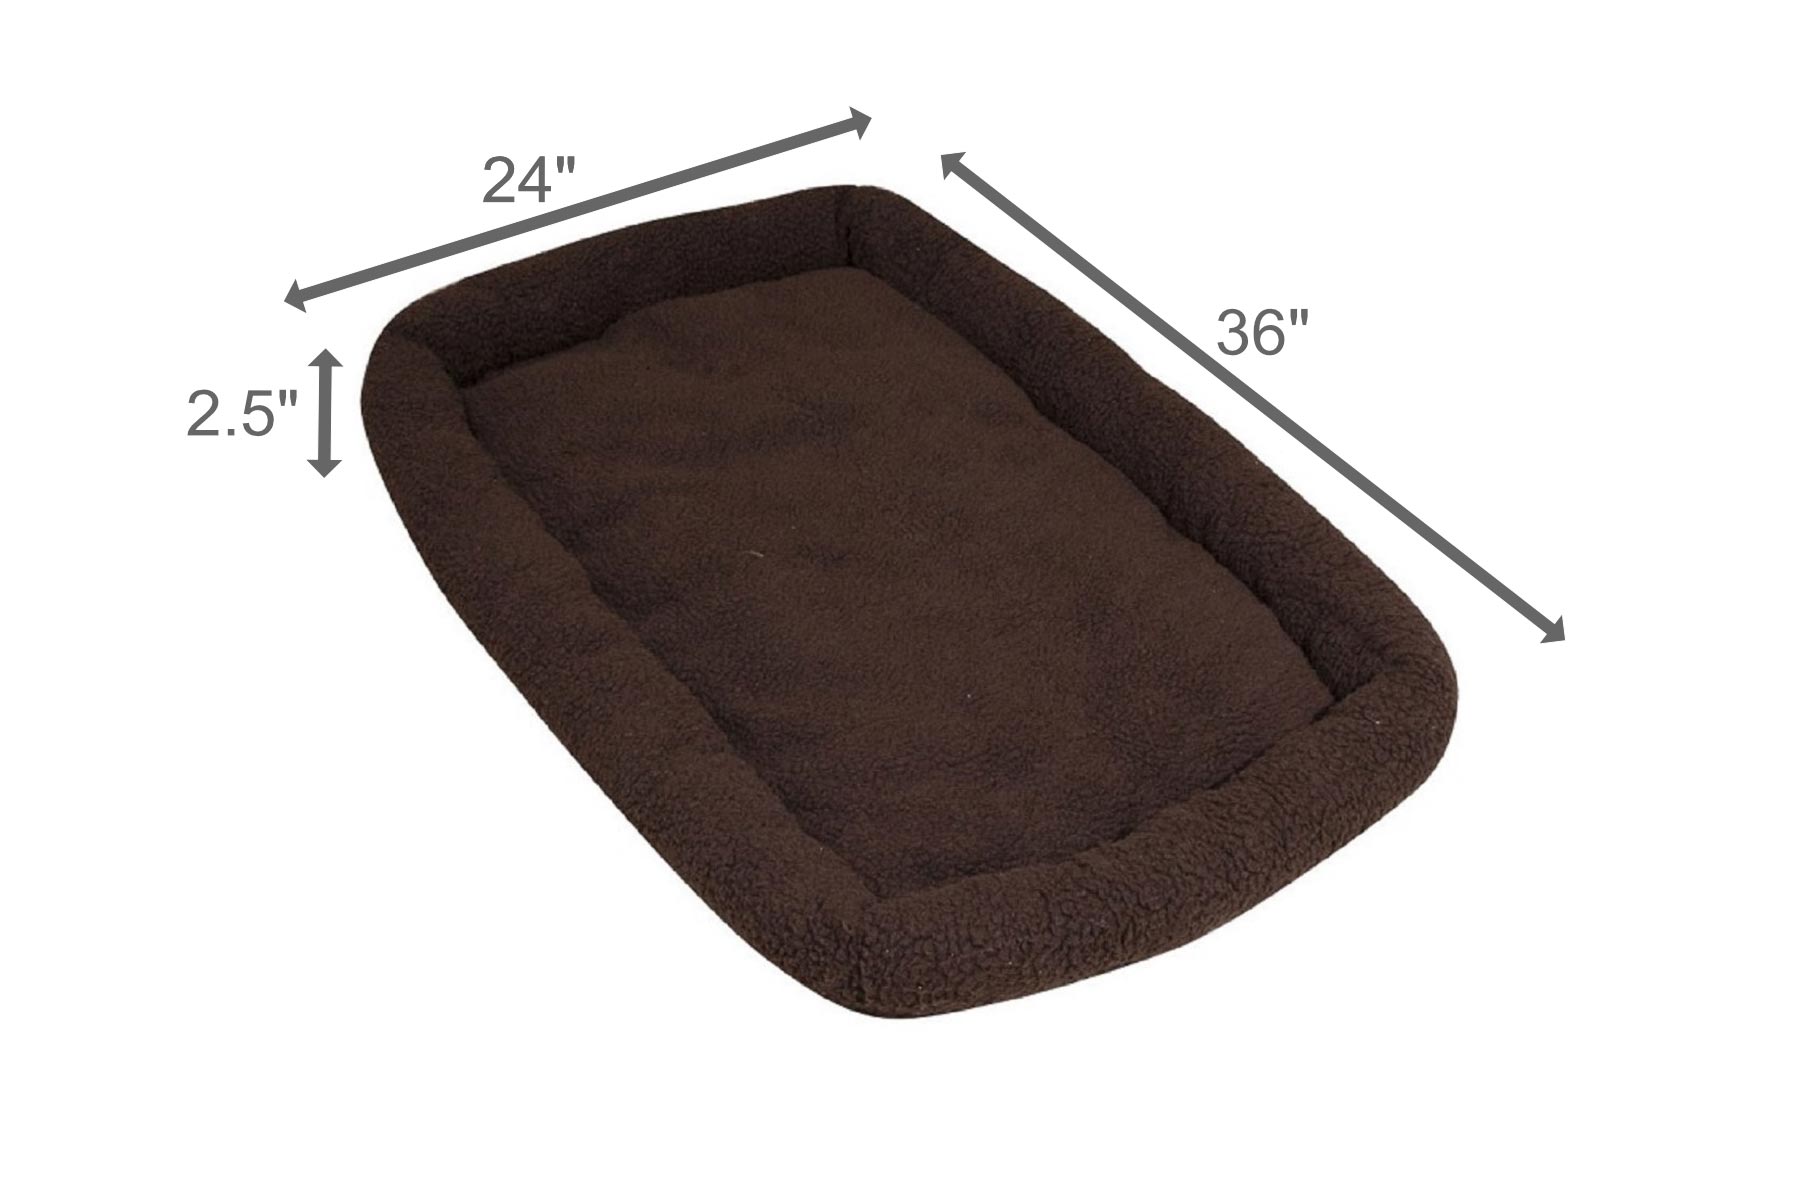 DP Palace bed dimensions